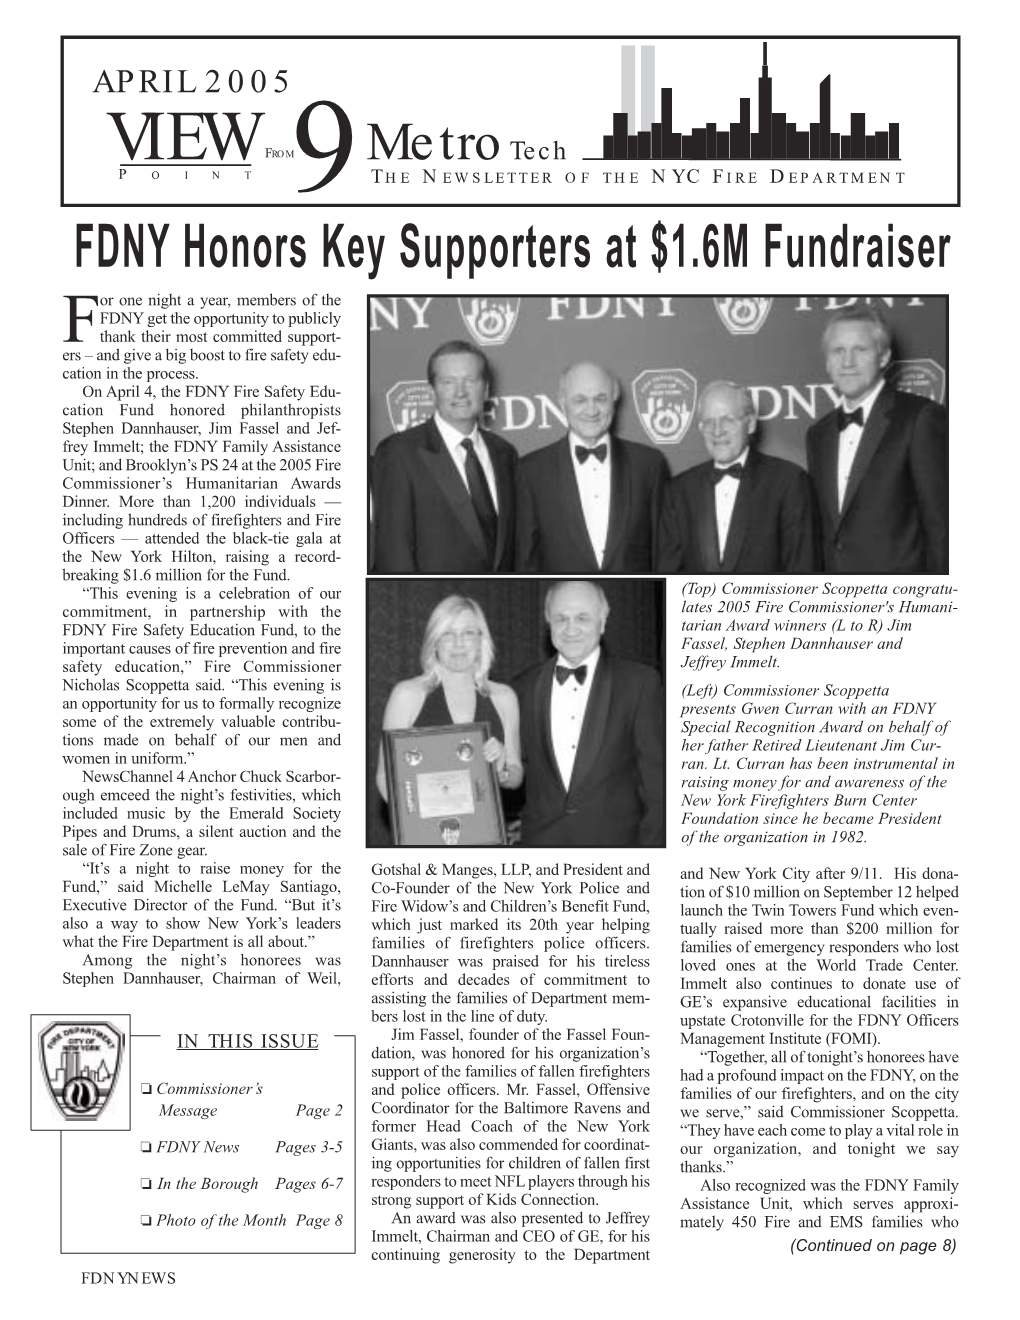 FDNY Honors Key Supporters at $1.6M Fundraiser